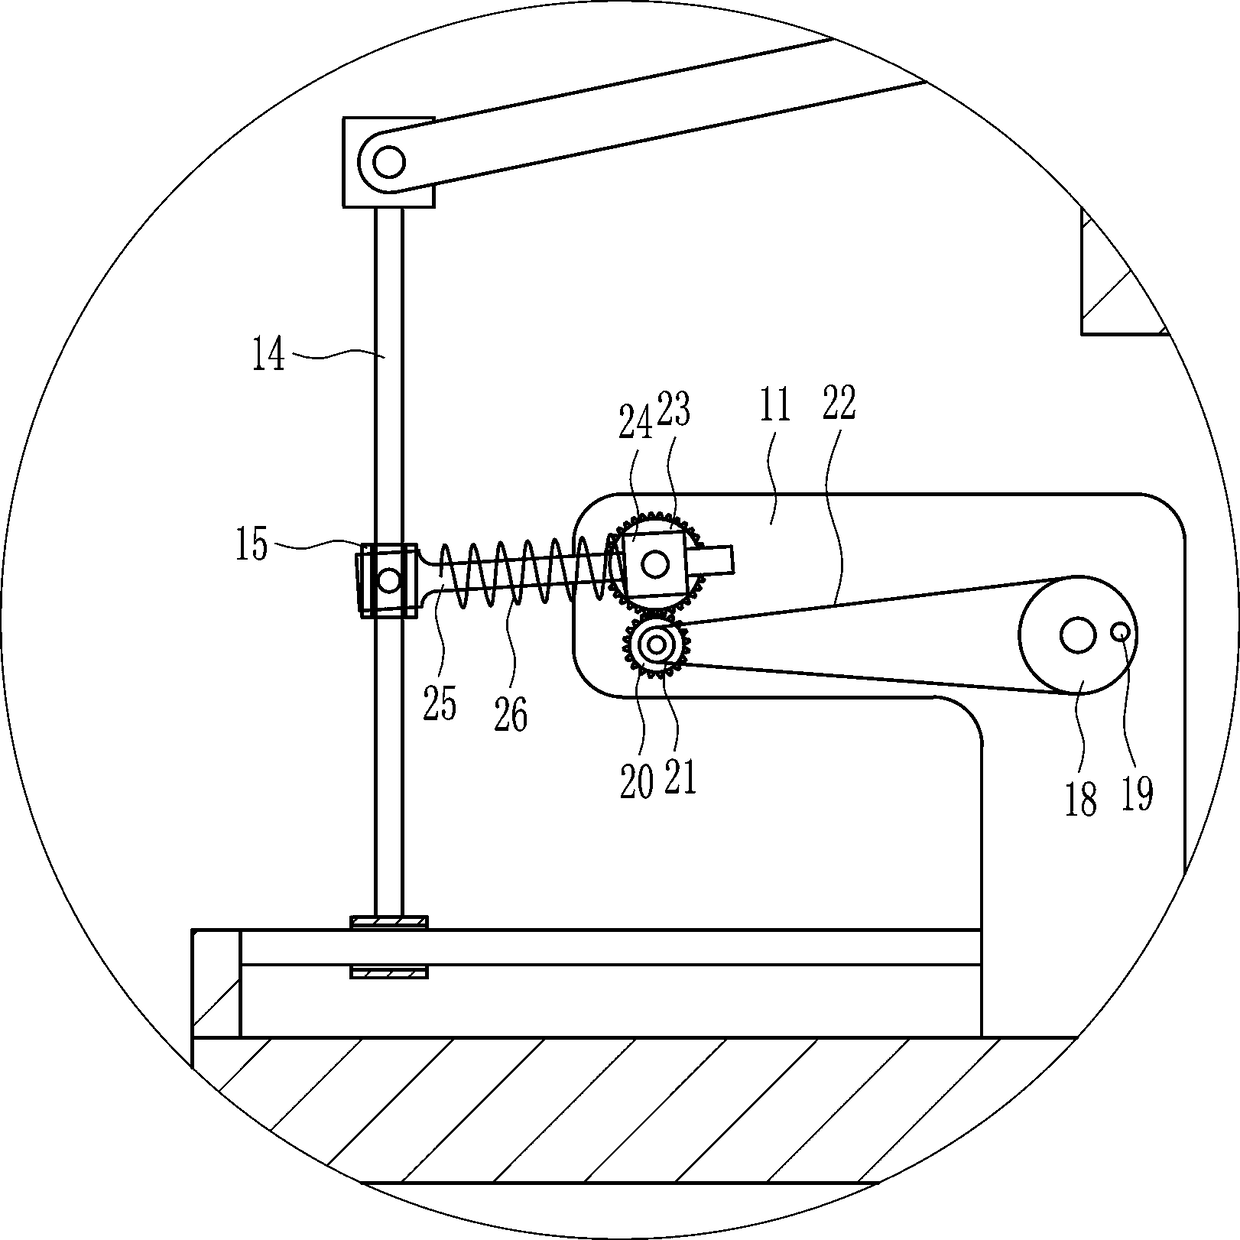 Linking rod transmission demonstration device for mechanical course